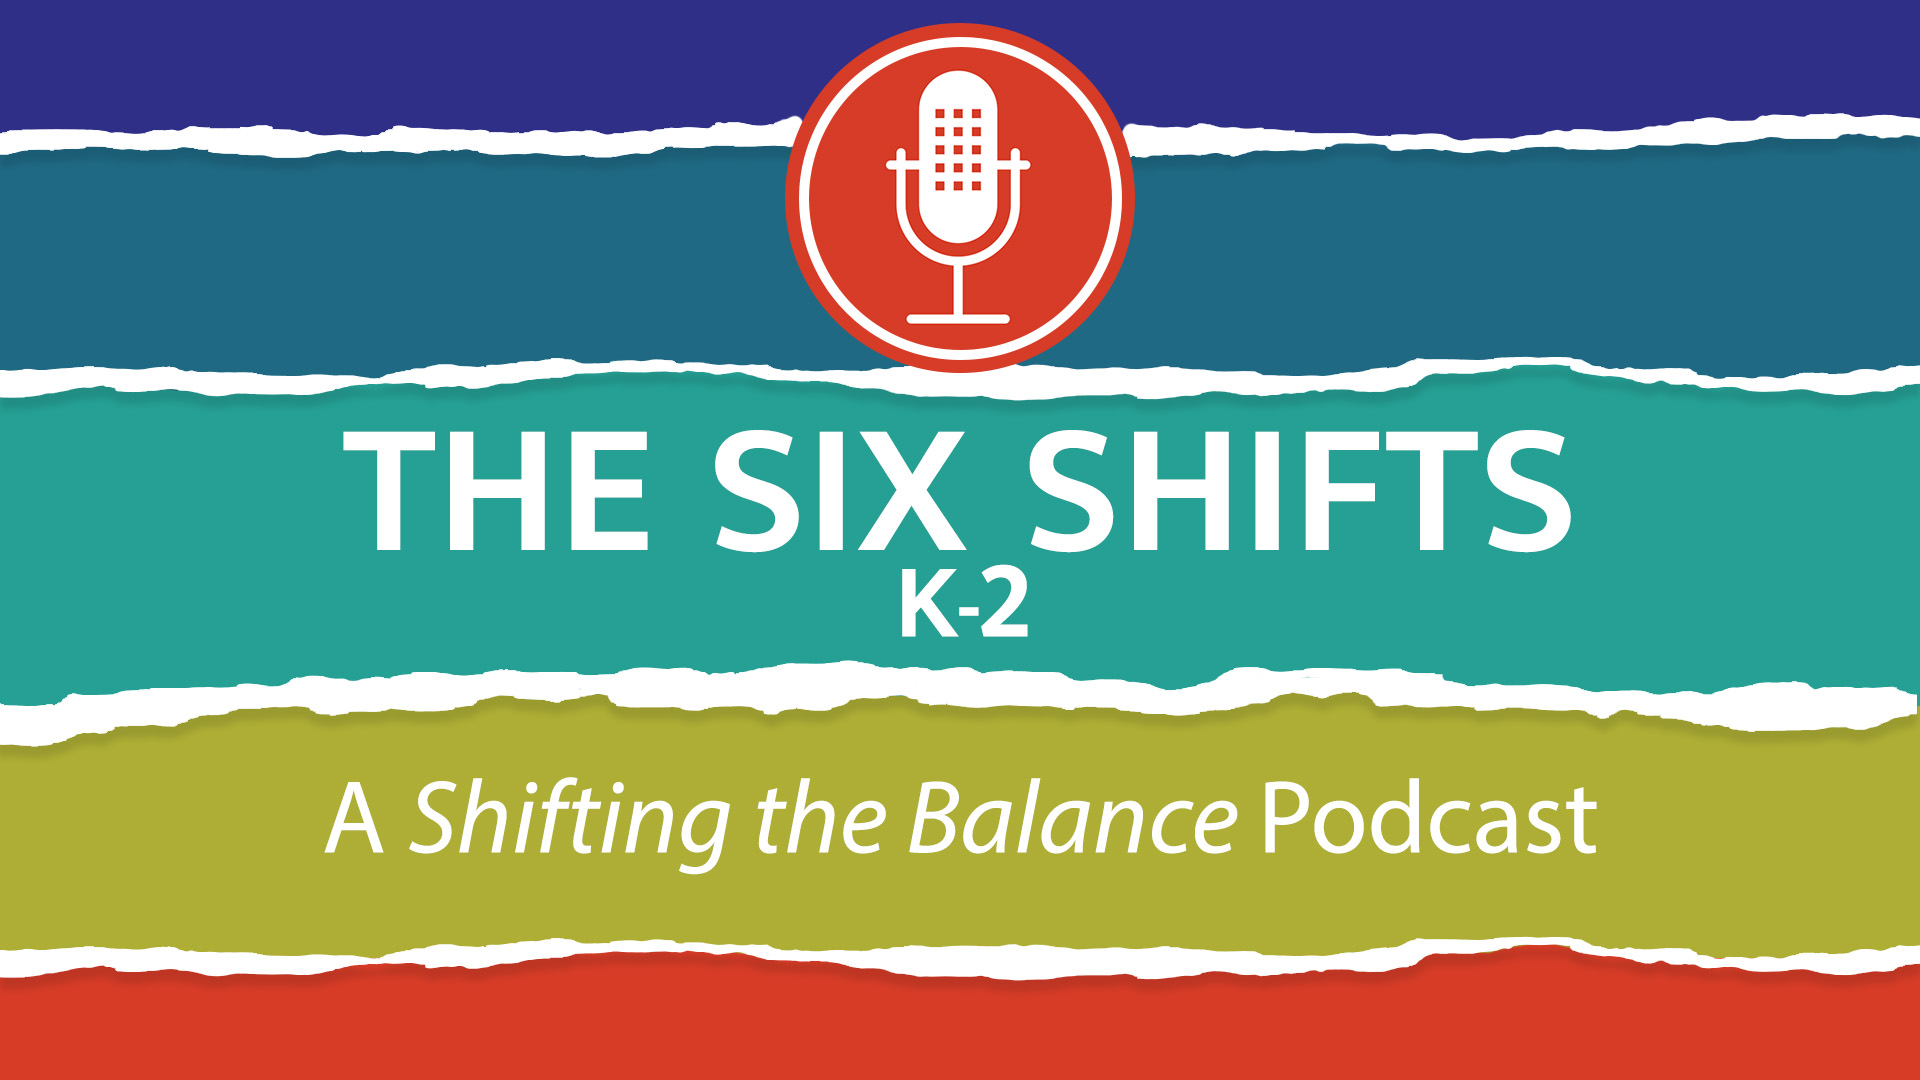 Shifting the Balance K-2 Podcast Provides an Overview of the Six Shifts by Jan Burkins and Kari Yates